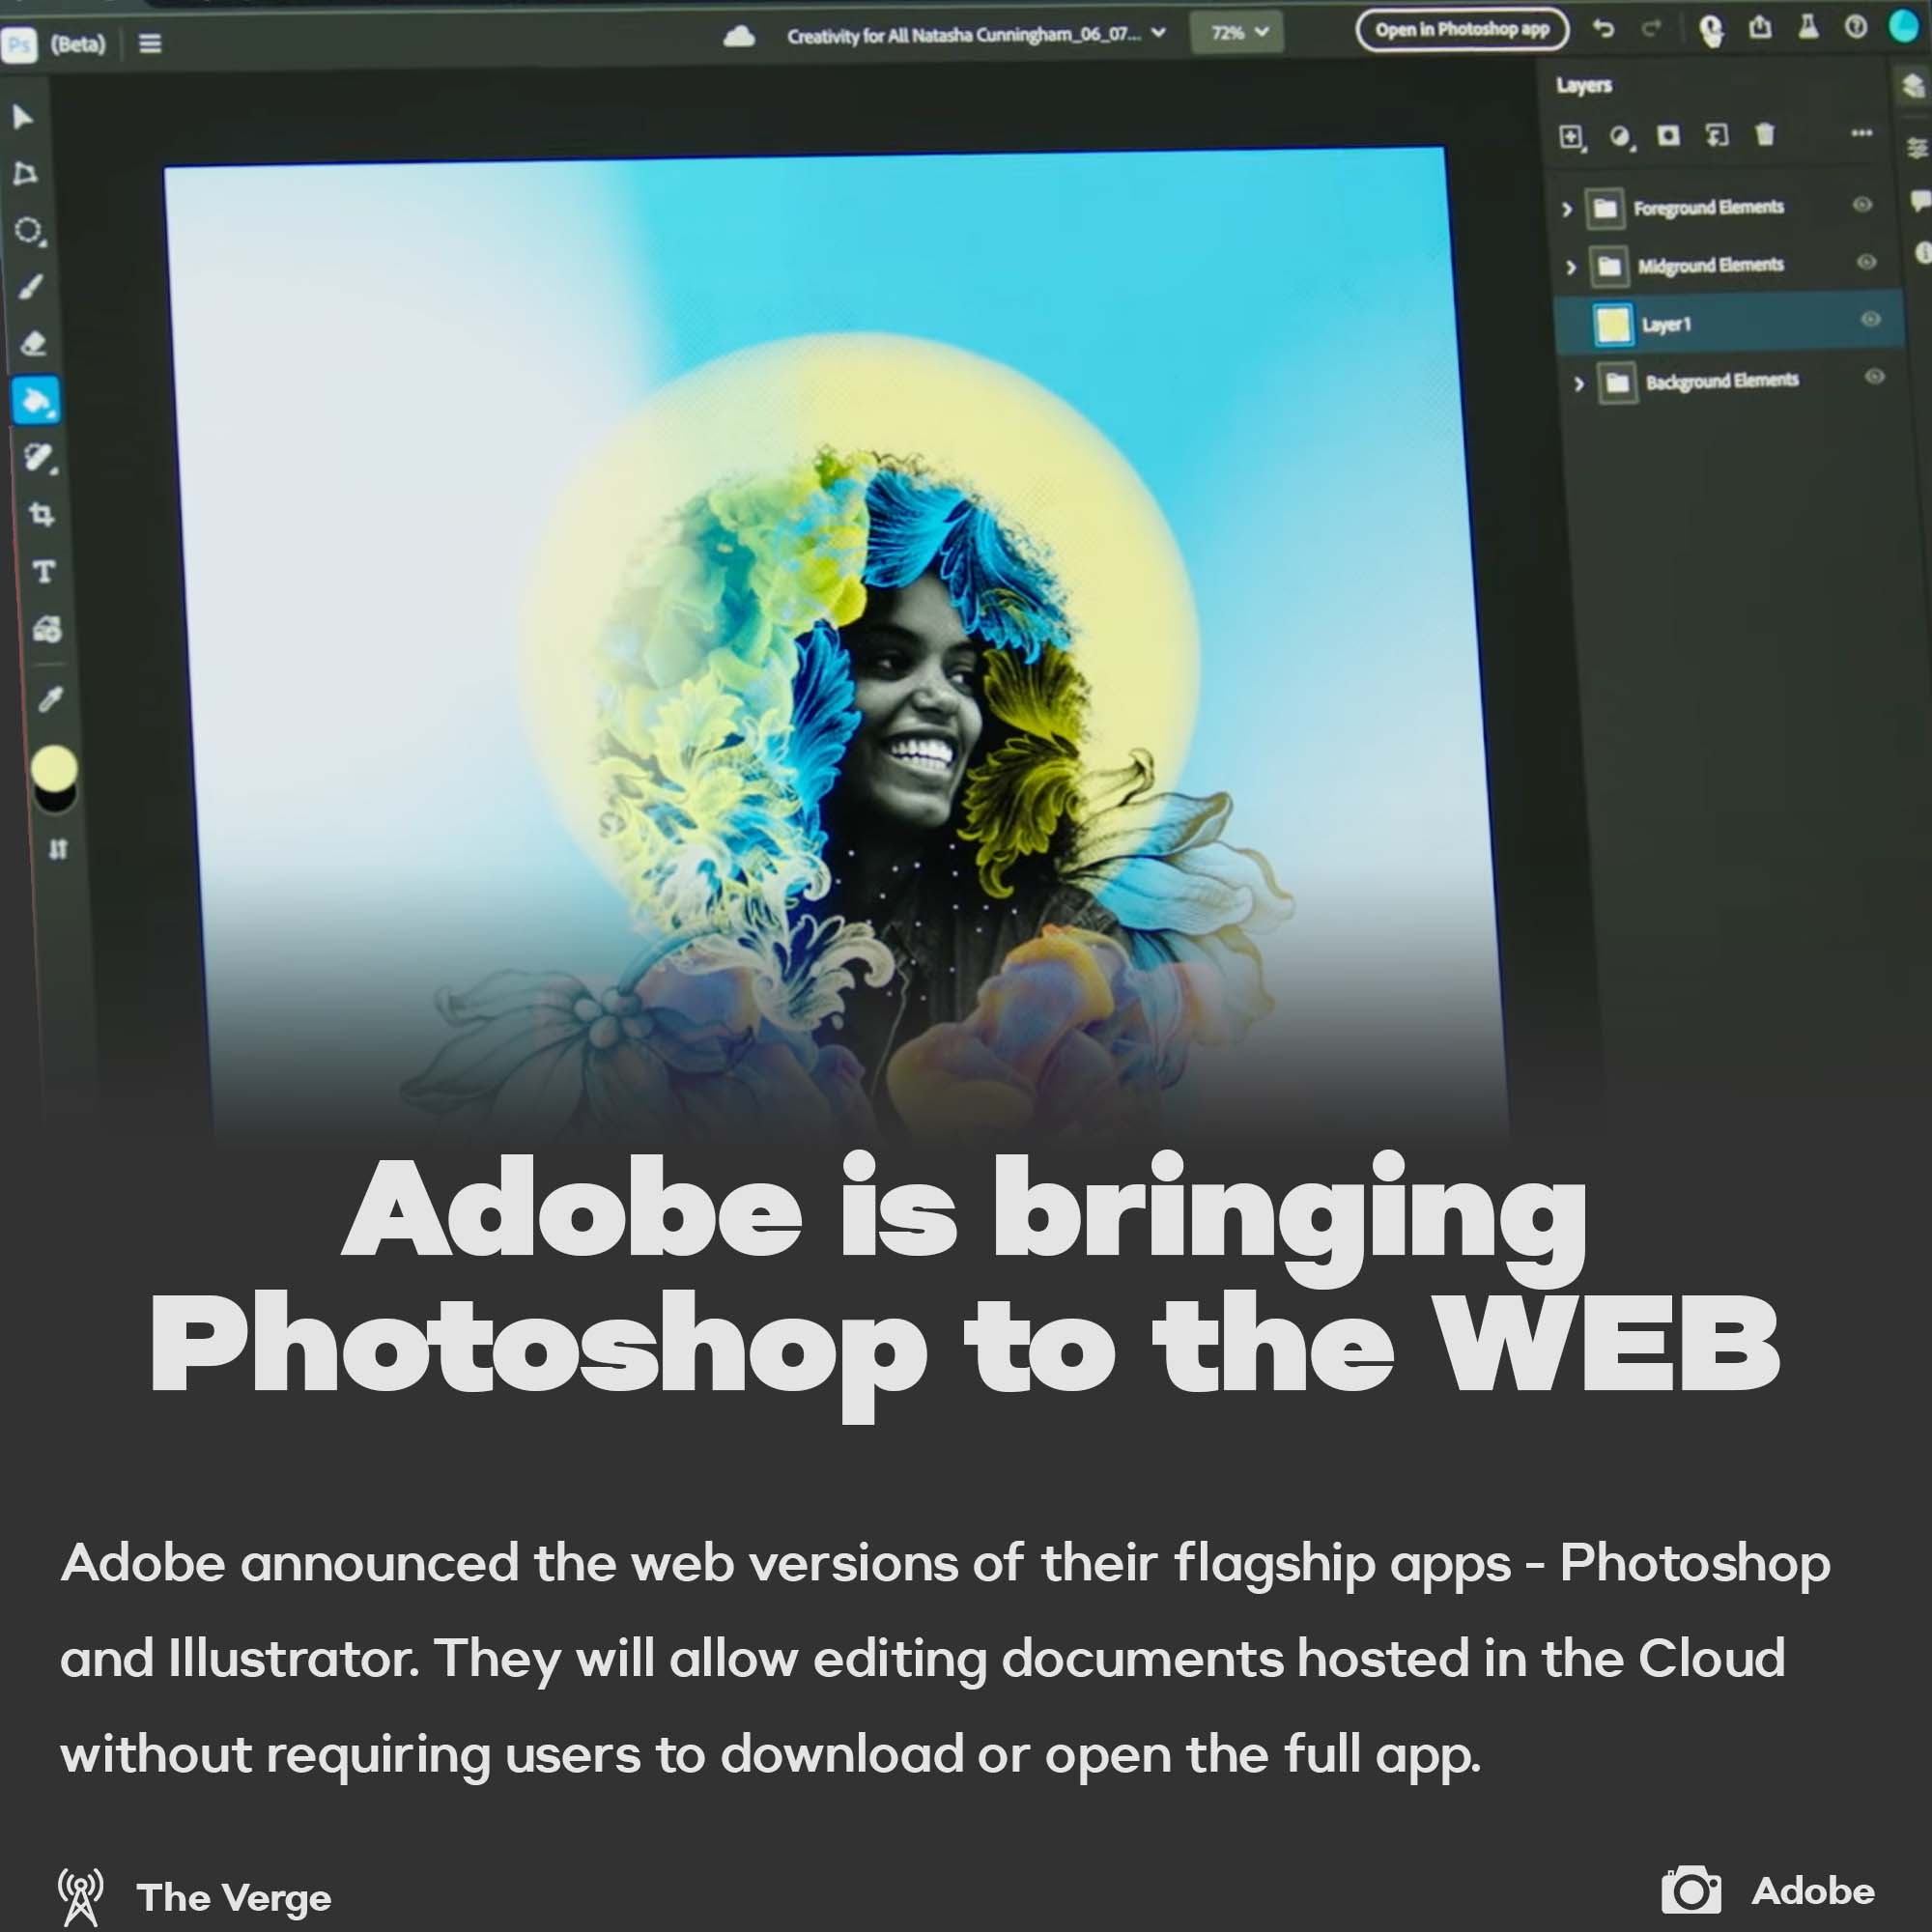 Adobe launched web version of the Photoshop and Illustrator